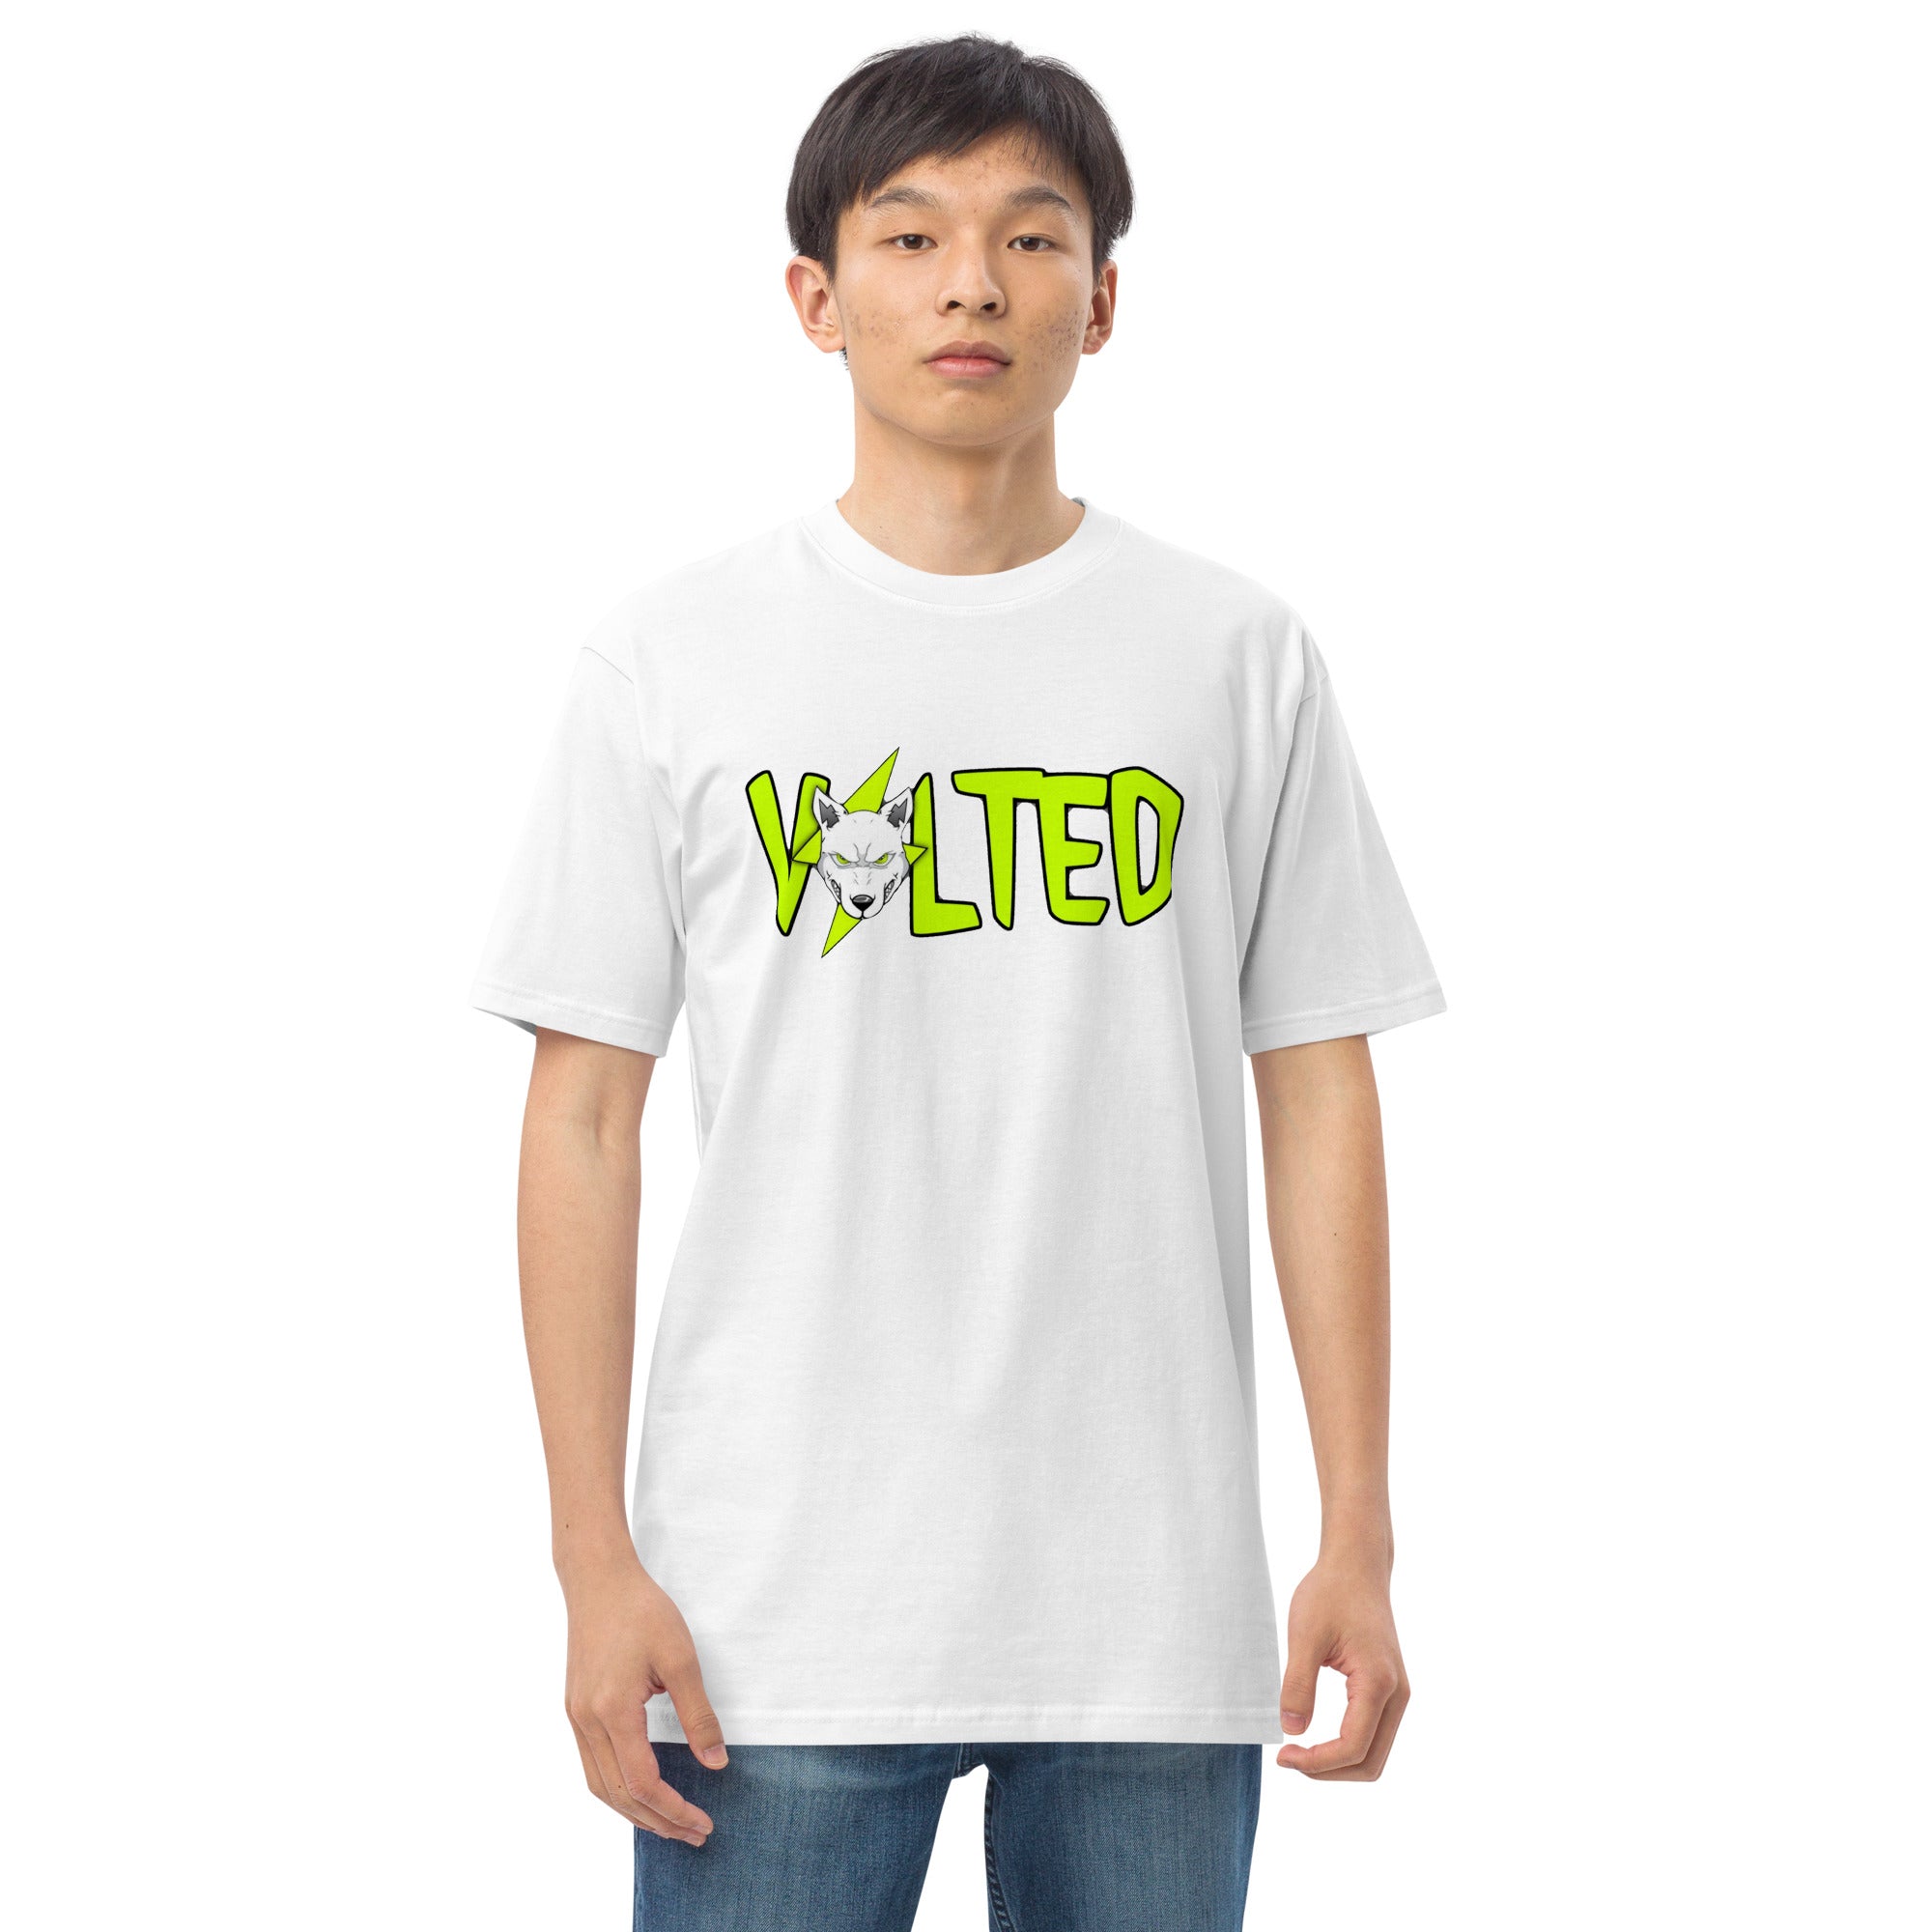 VOLTED⚡️NFTees - NFTees365